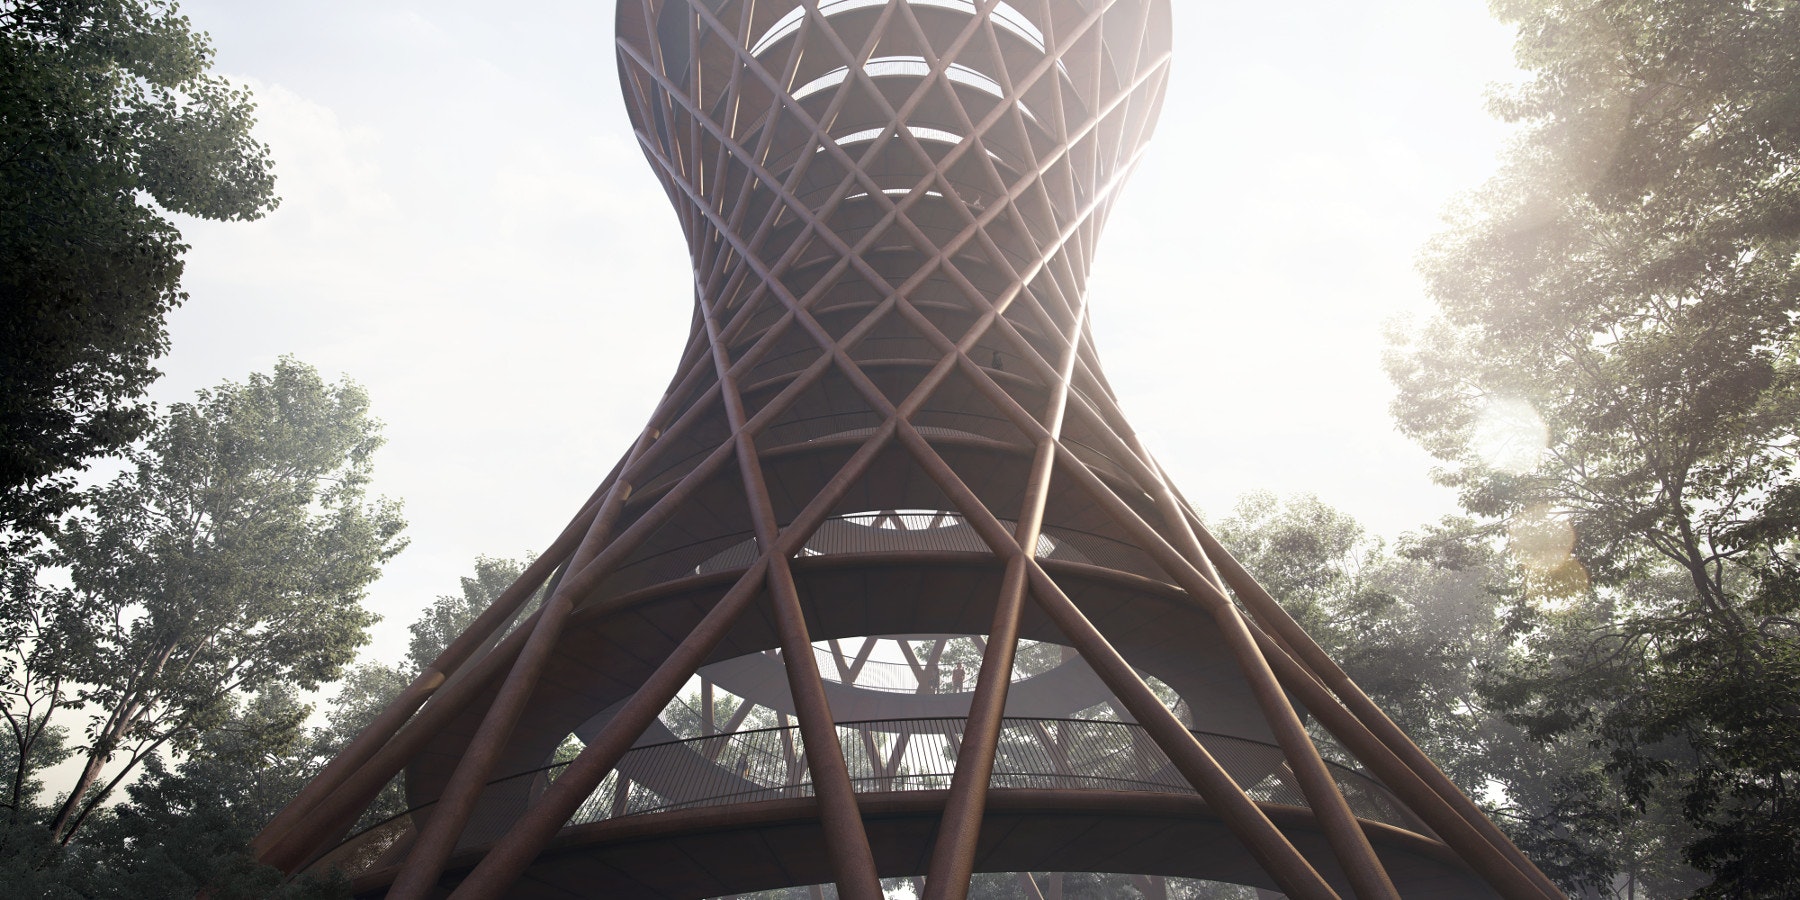 The structure shape allows for a wide observation deck at the top. Image by EFFEKT